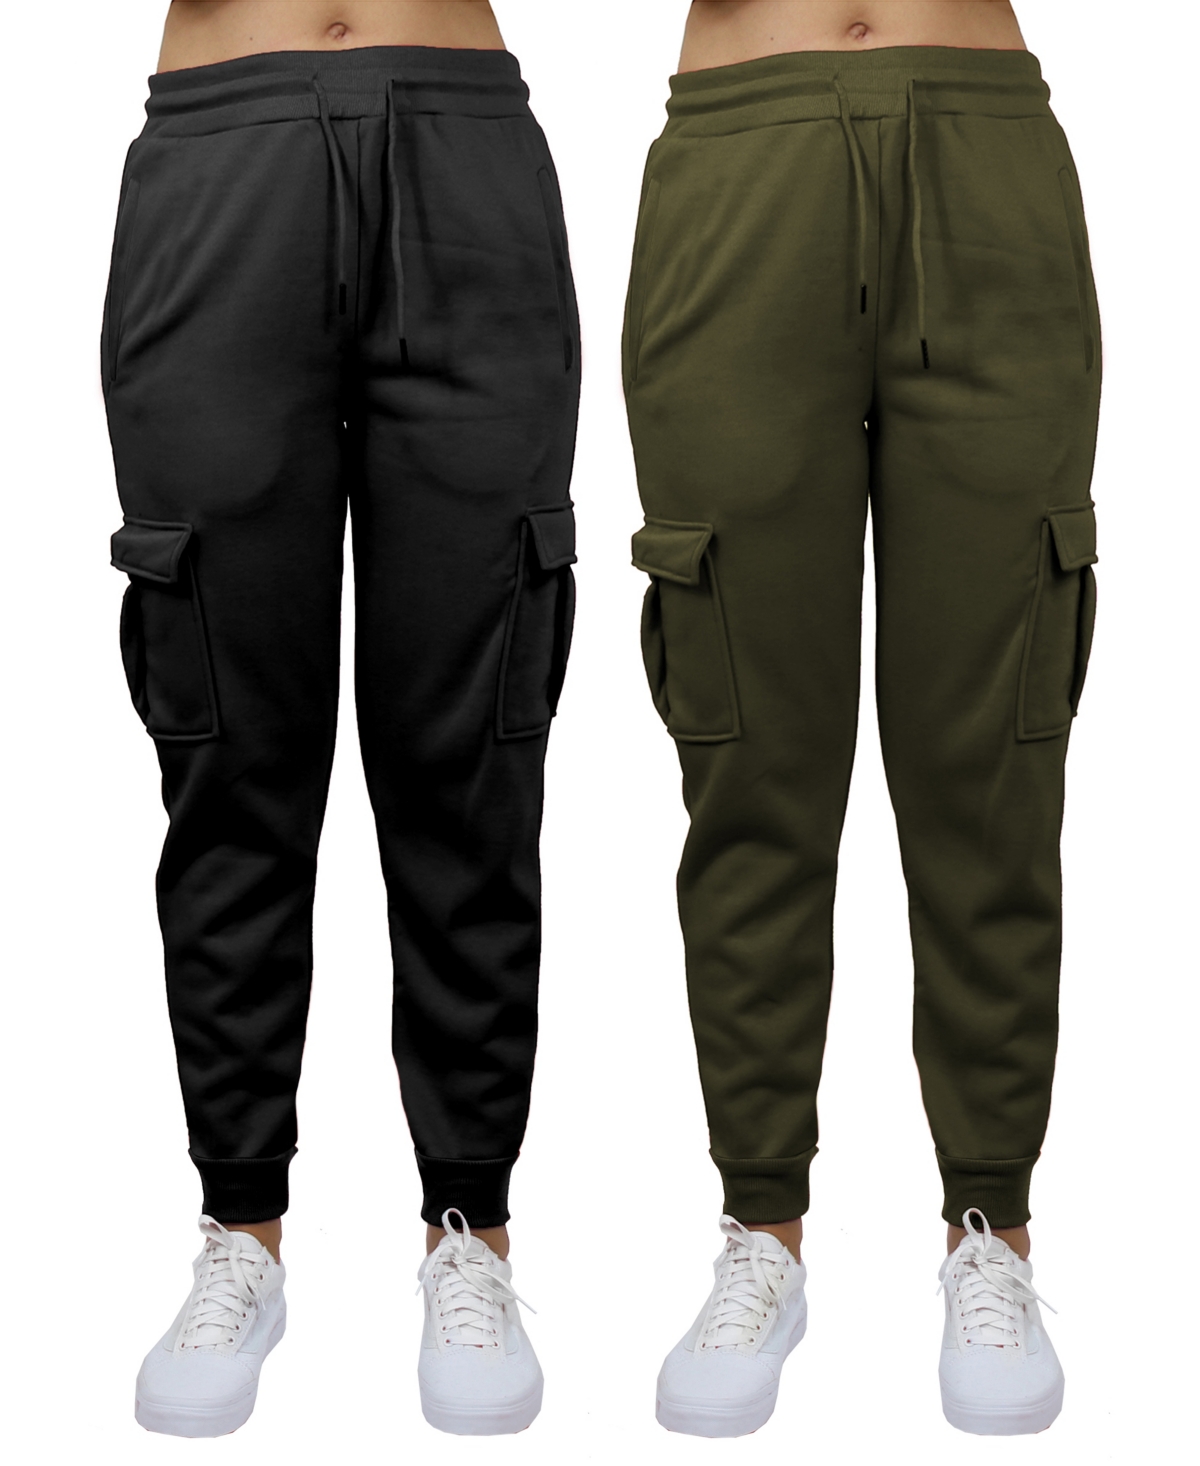 Galaxy By Harvic Women's Heavyweight Loose Fit Fleece Lined Cargo Jogger Pants Set, 2 Pack In Black,olive